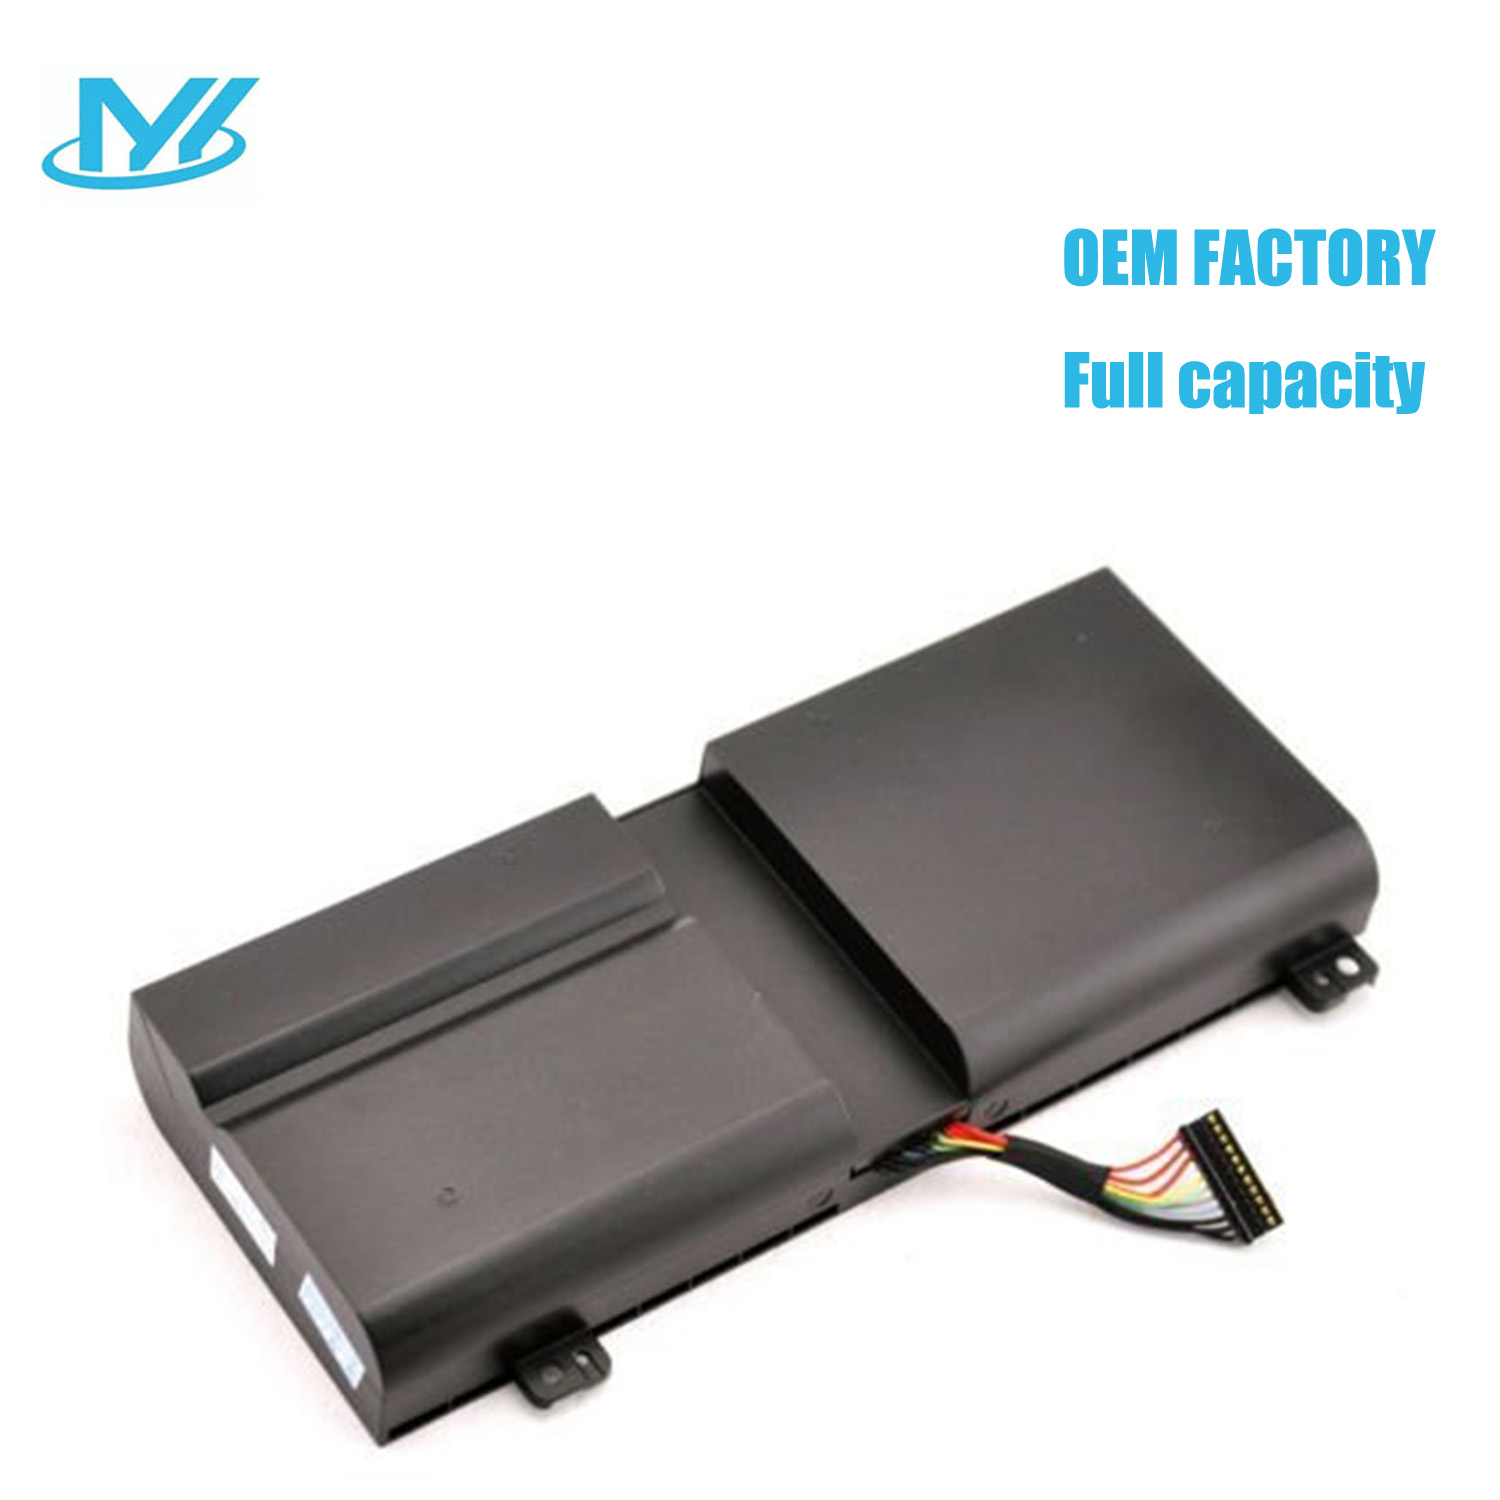 G05YJ Y3PN0 8X70T 14.48V 4350mAh lithium ion batteries laptop battery for DELL Alienware 14 Series ALW14D-5528 ALW14D-1528 ALW14D-4528 laptop